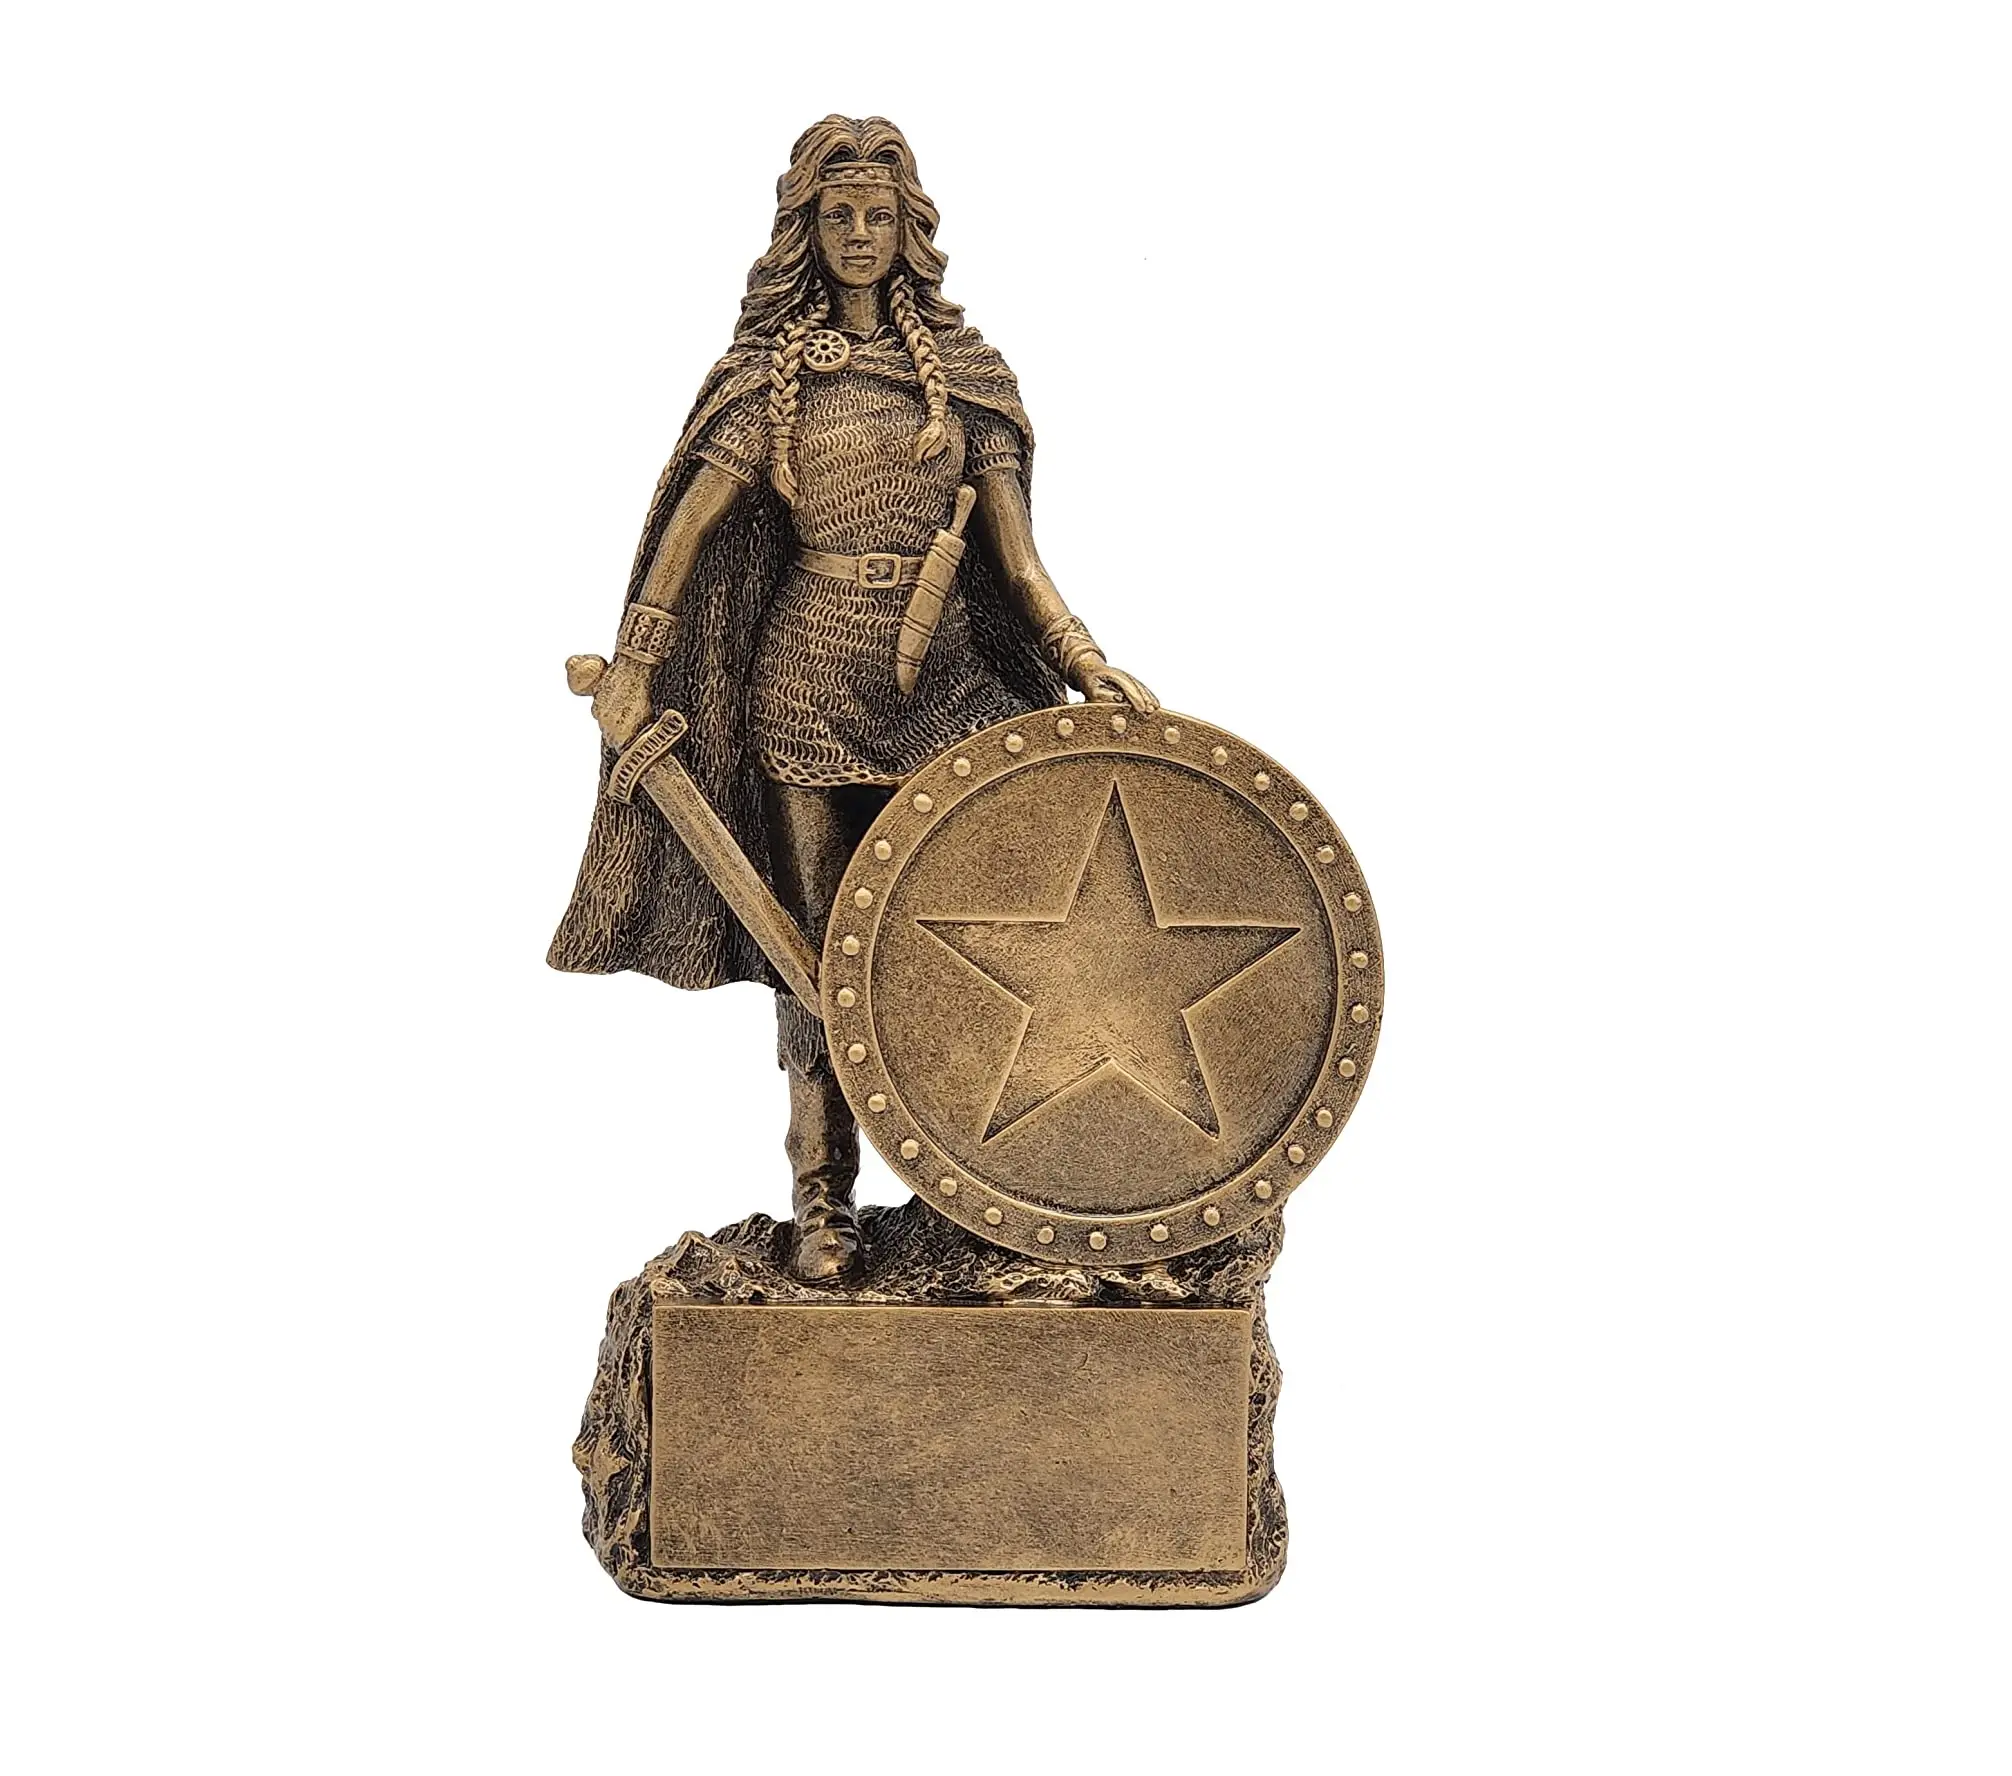 Female Warrior Trophy - Gold | Engraved Warrior Woman Award - 6.75 Inch Tall - Engraved Plate Upon Request